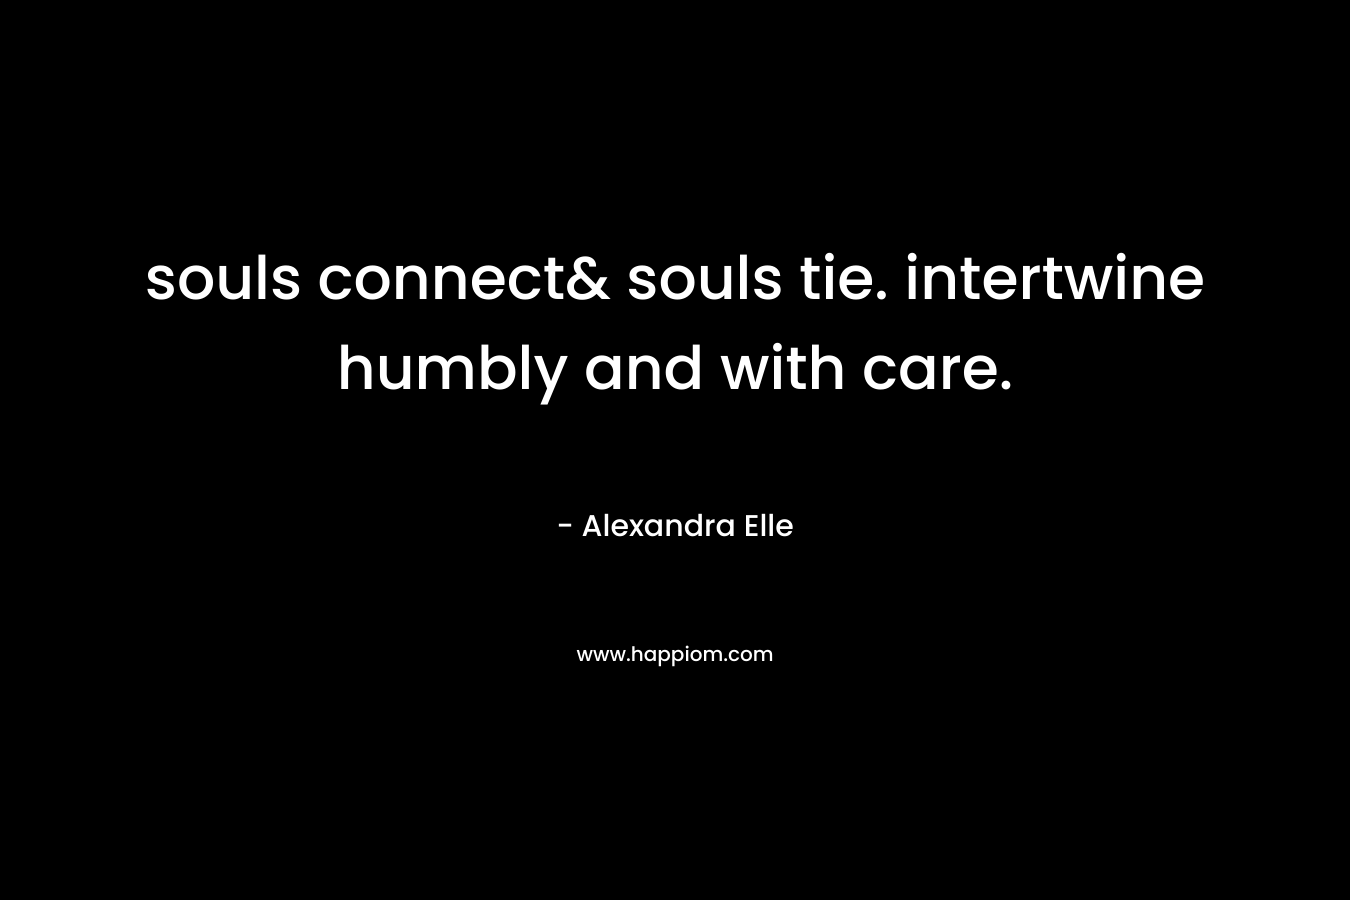 souls connect& souls tie. intertwine humbly and with care.